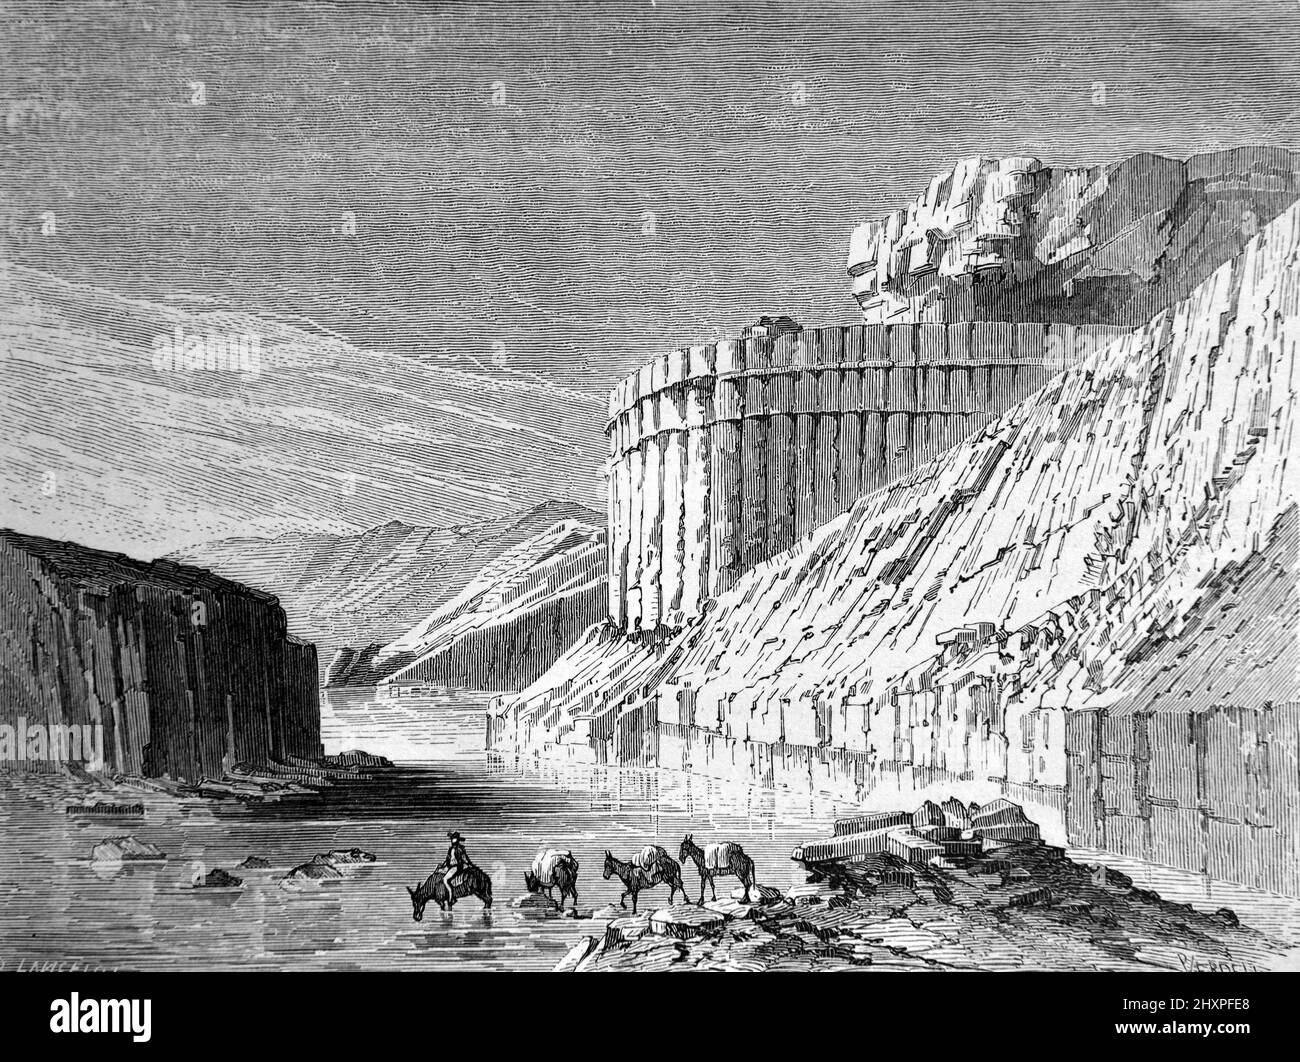 Rocks Formations, Canyon and Cliffs Above the Rio Grande River near  Santo Domingo Pueblo New Mexico US, USA or United States of America. Vintage Illustration or Engraving 1860. Stock Photo